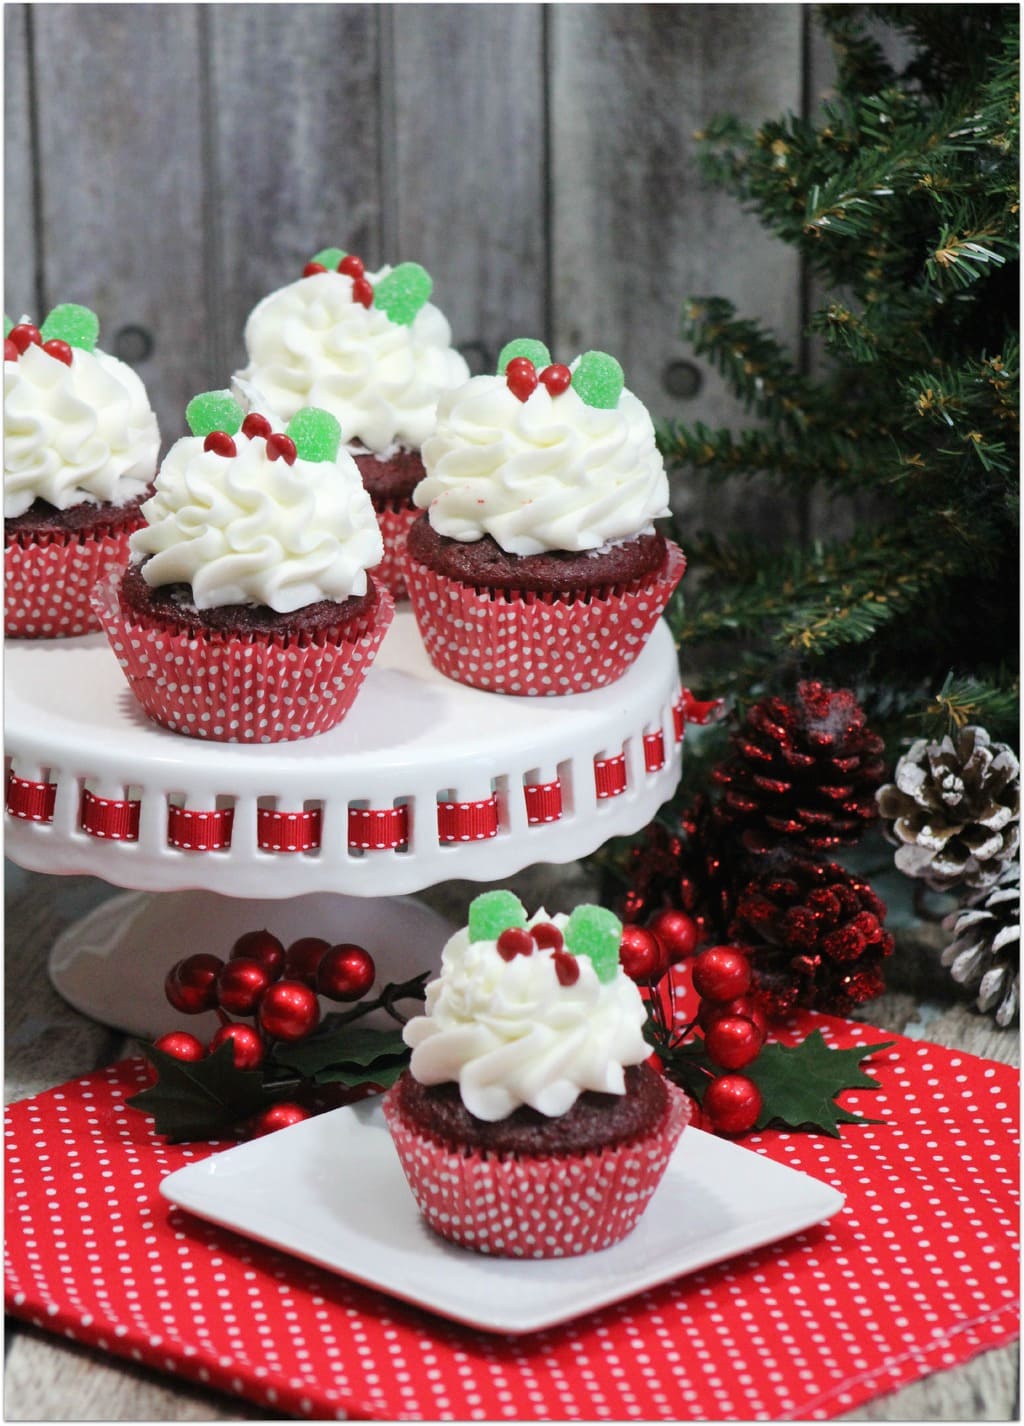 These Holly Red Velvet Cupcakes are so festive, and the perfect dessert to take to a Christmas party! The recipe is easy, so you won't spend hours in the kitchen. You're welcome! This will end up being your go-to holiday dessert recipe!